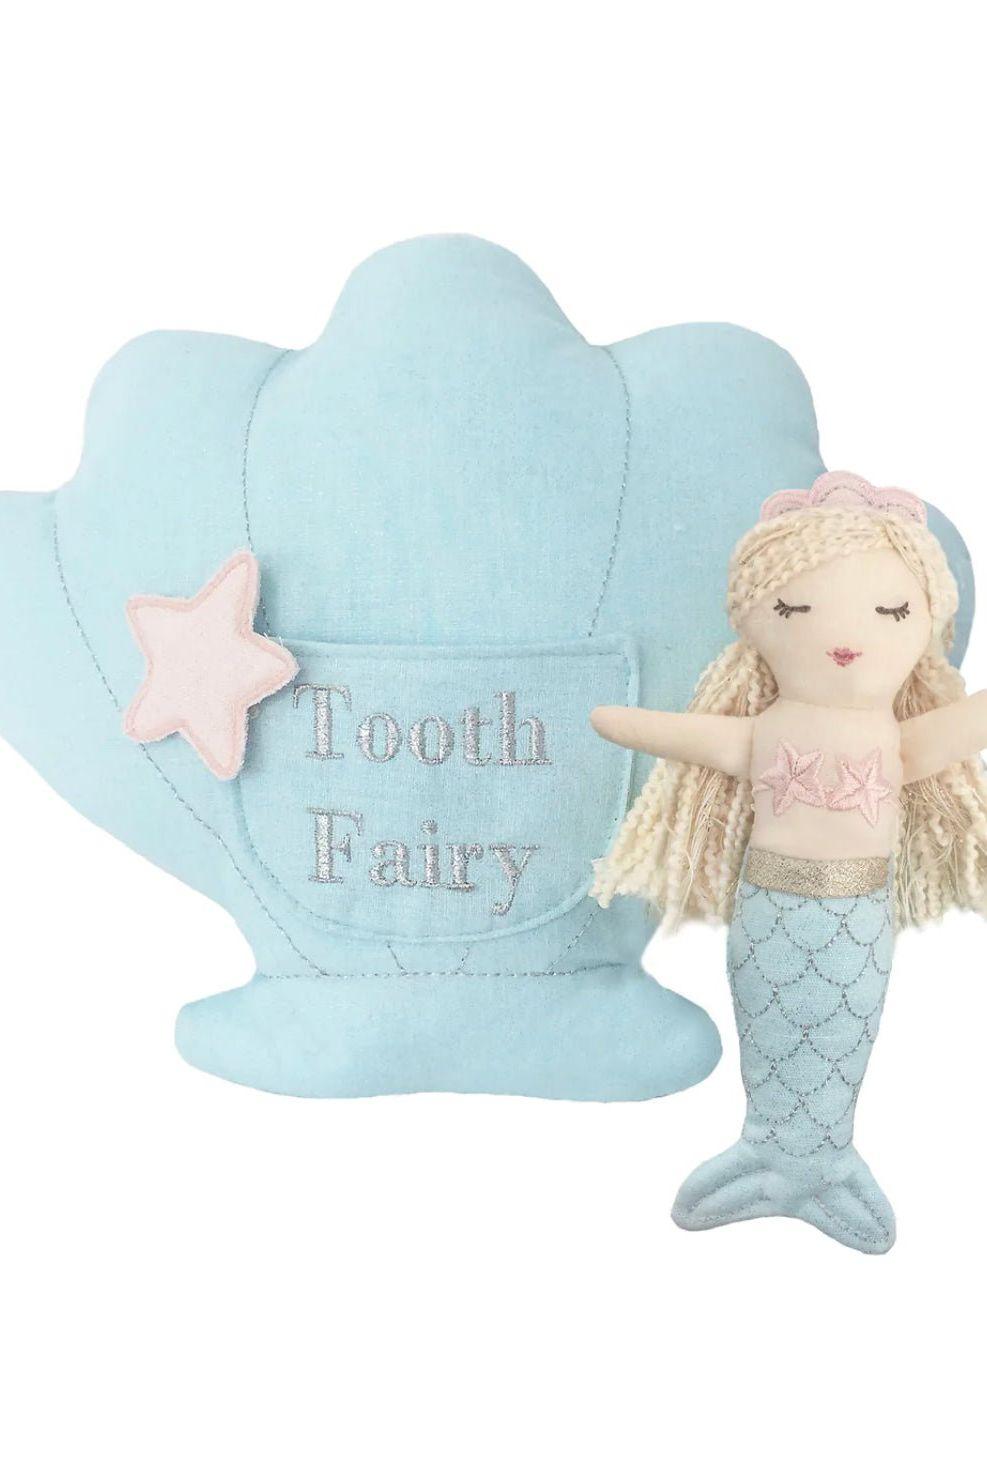 Mimi the Mermaid Tooth Fairy Shell Pillow - Magical Tooth Protector - Sophia Rose Children's Boutique